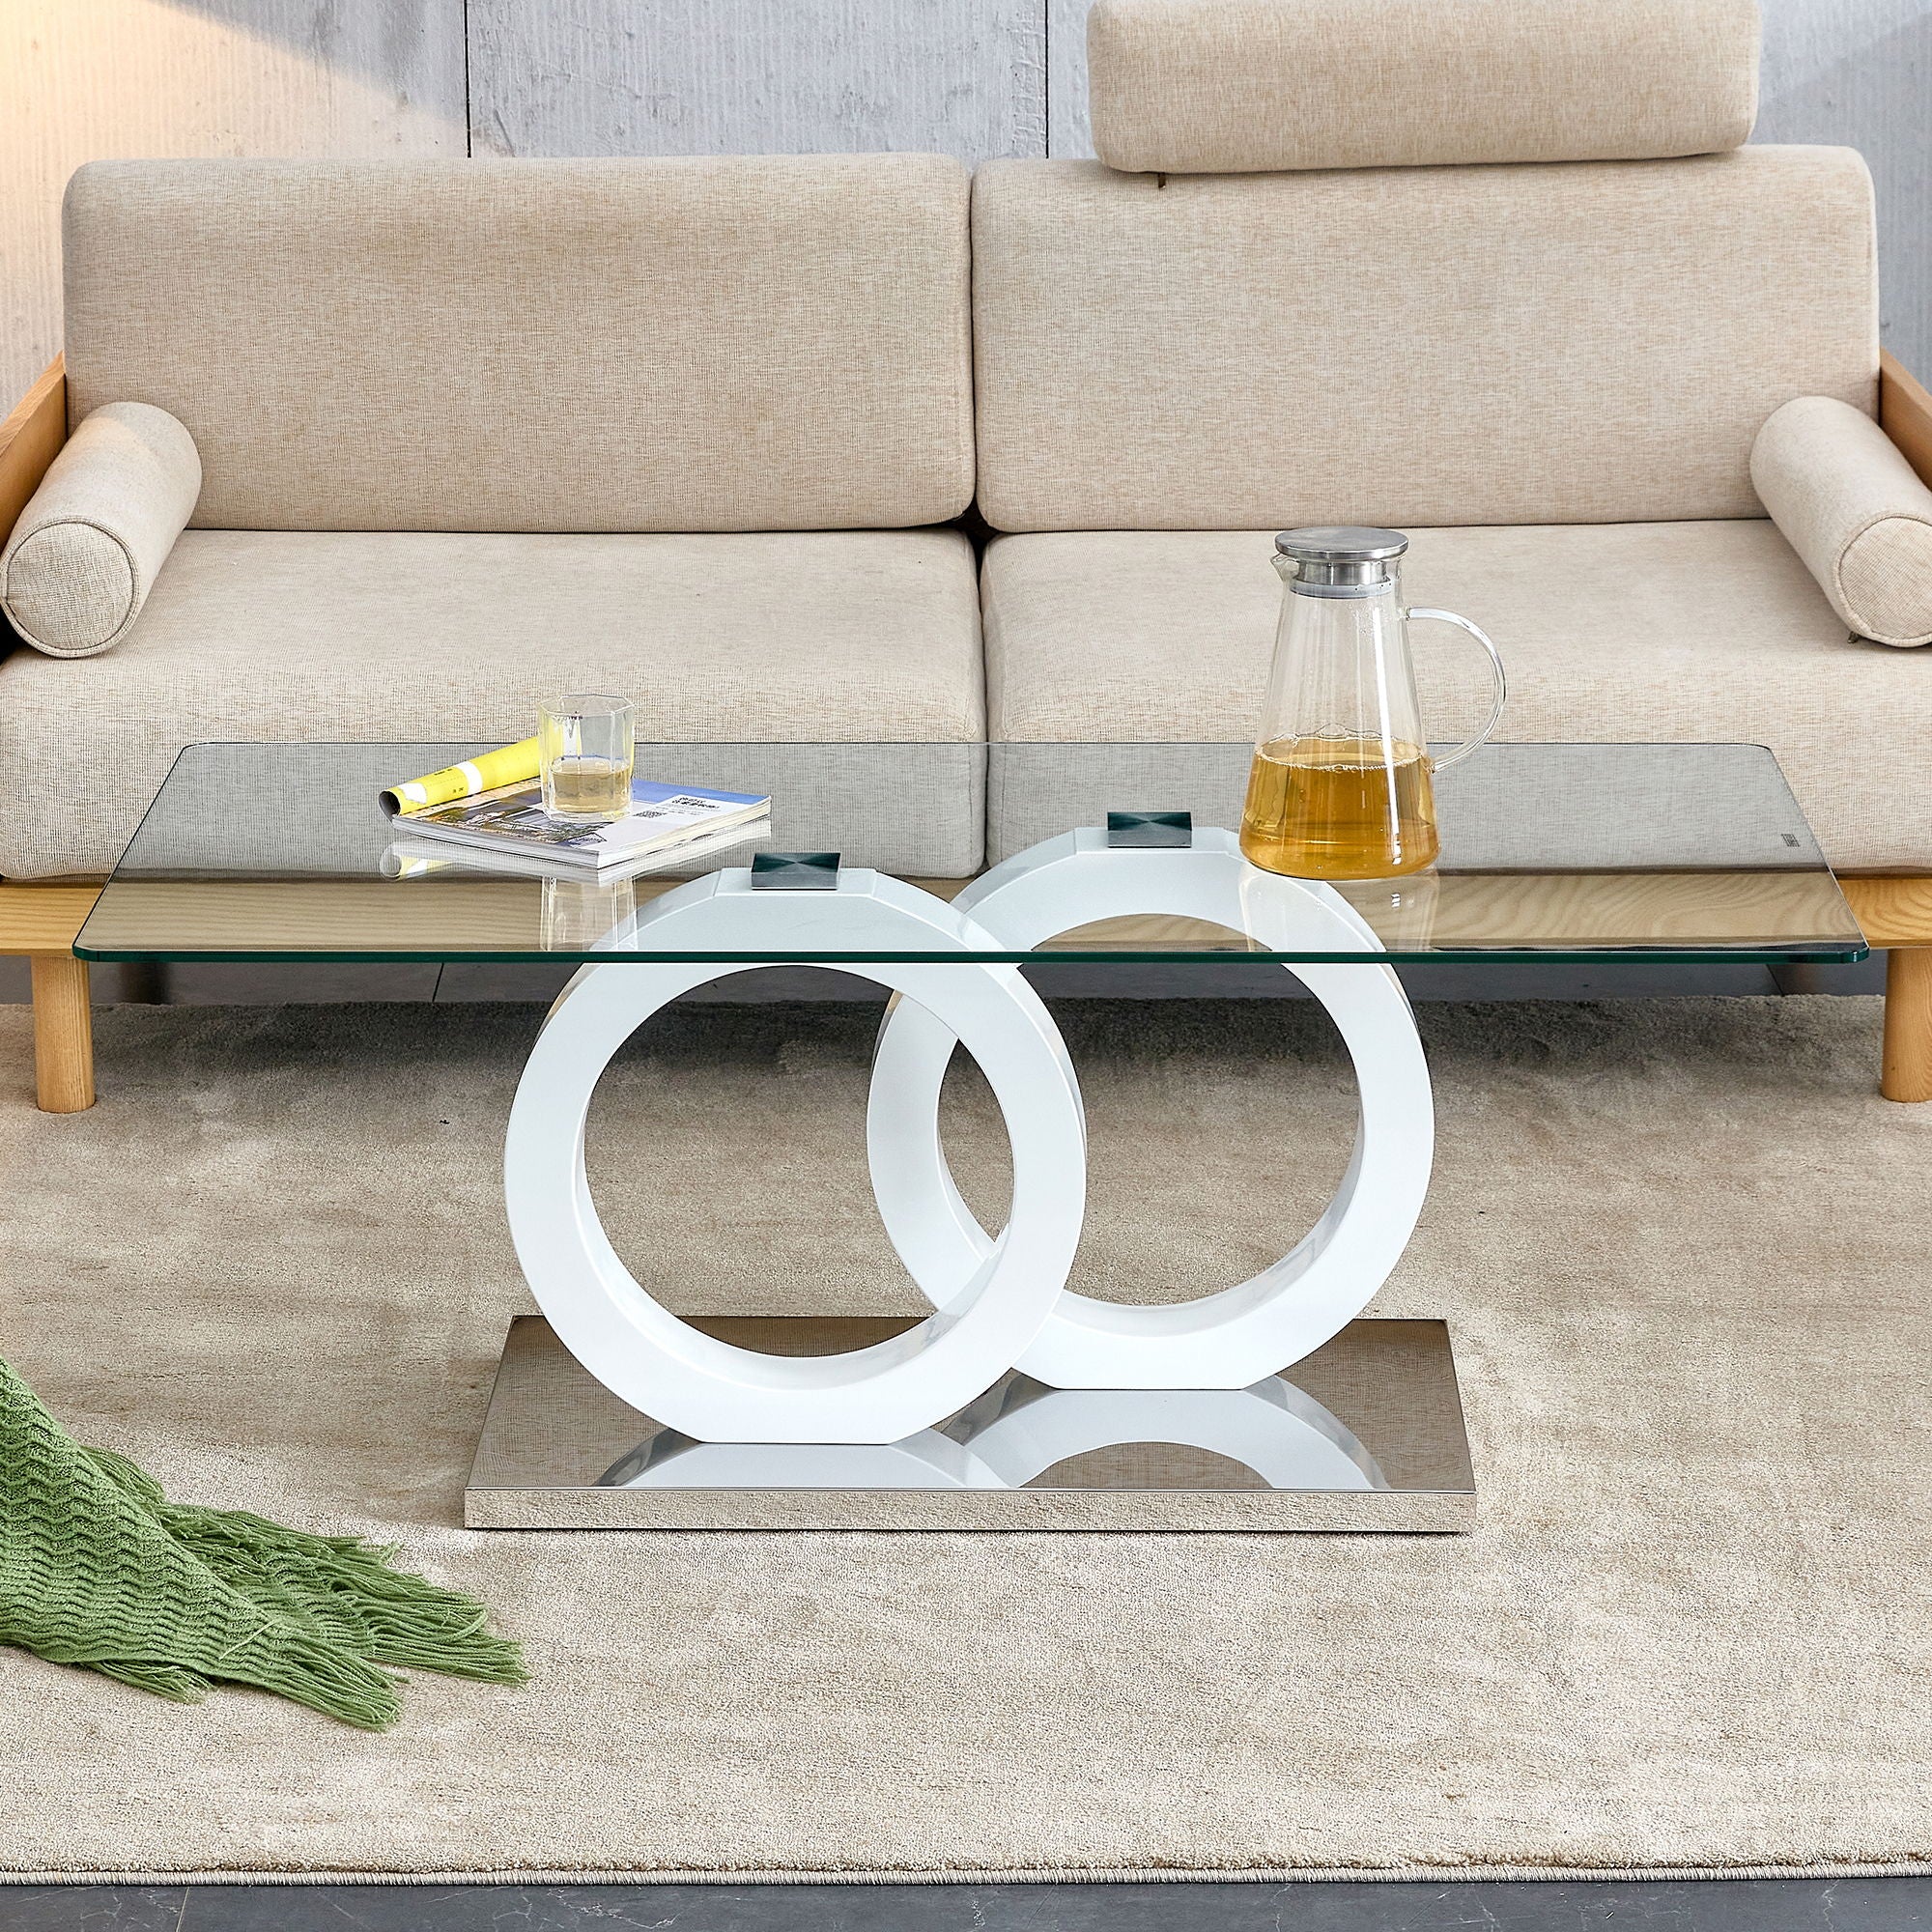 Rectangular Modern And Fashionable Coffee Table With Tempered Glass Tabletop And White Legs Suitable For Living Room